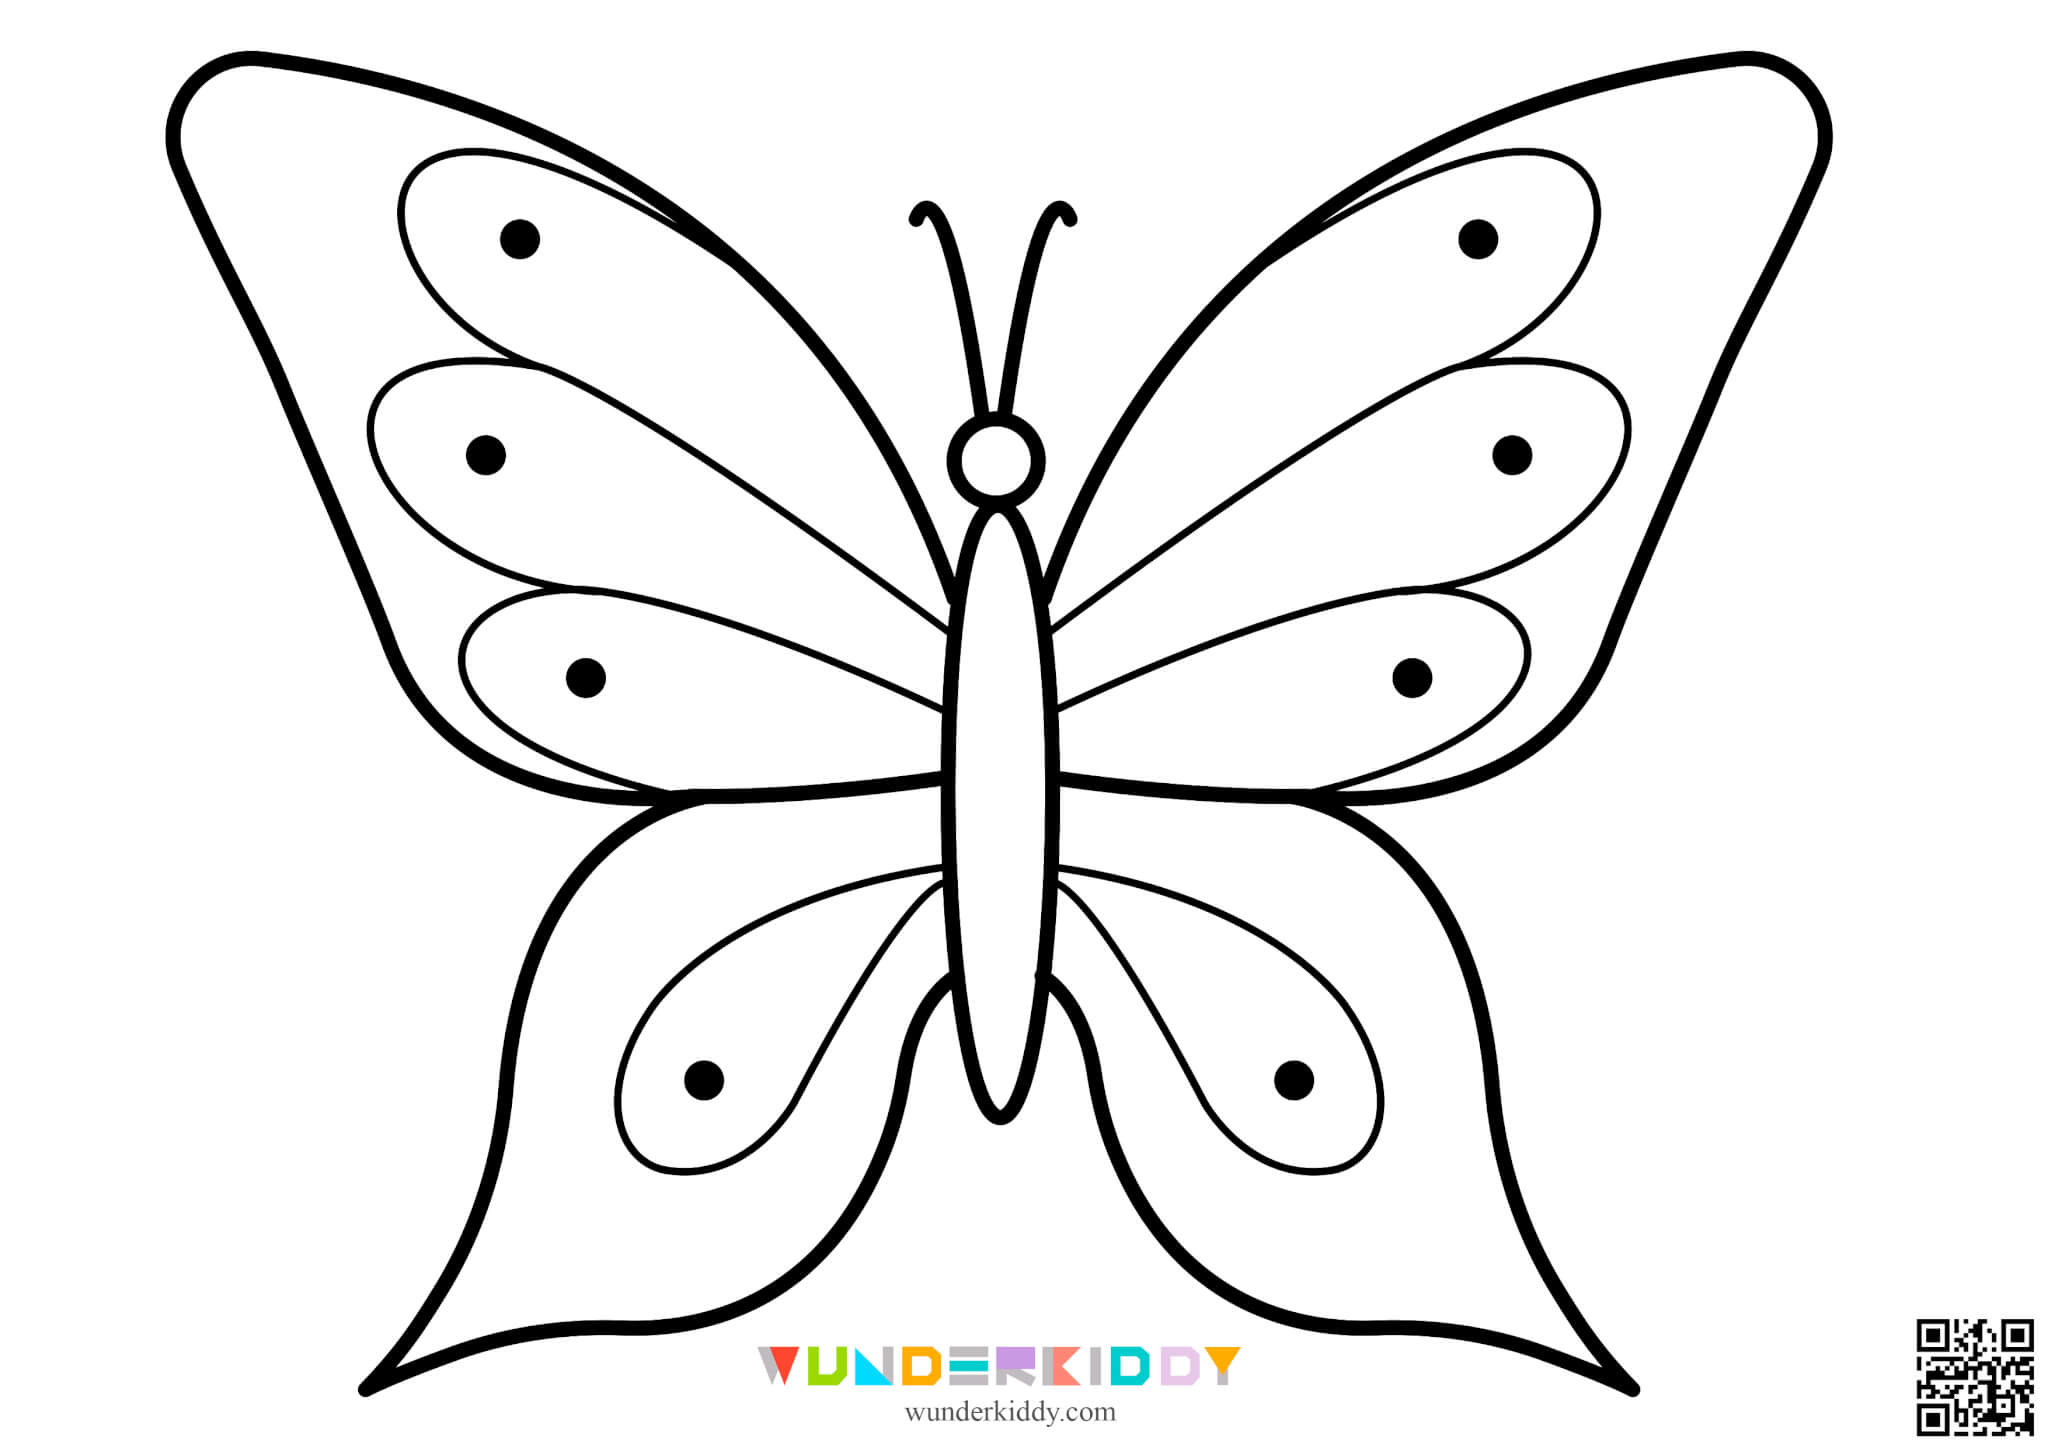 Butterfly Template Printable - Image 13